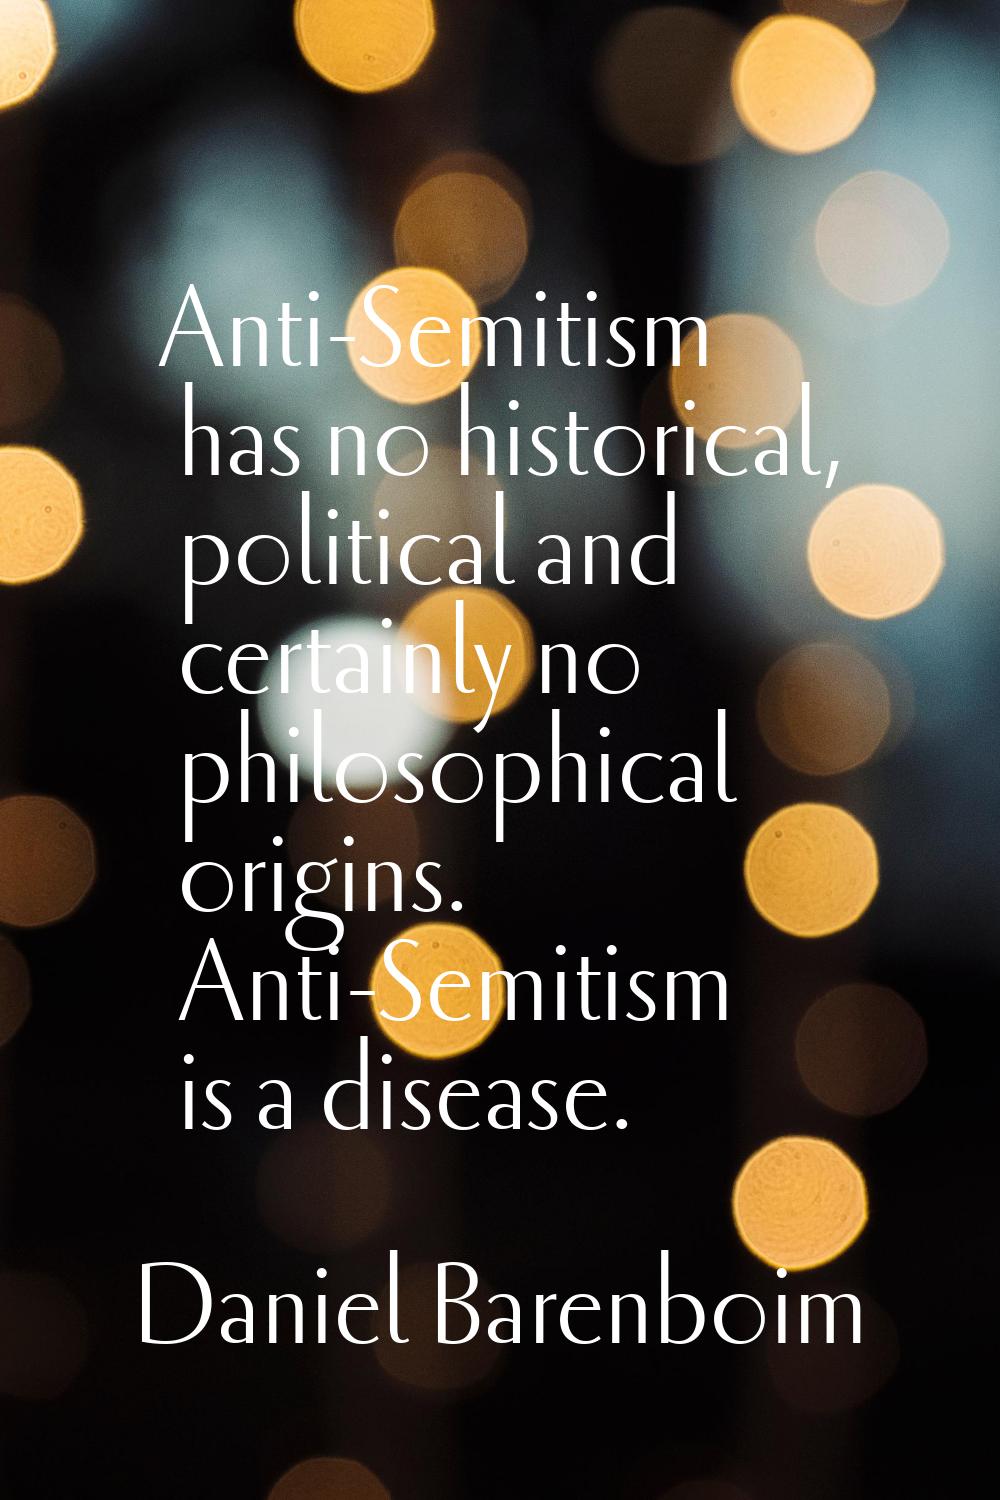 Anti-Semitism has no historical, political and certainly no philosophical origins. Anti-Semitism is